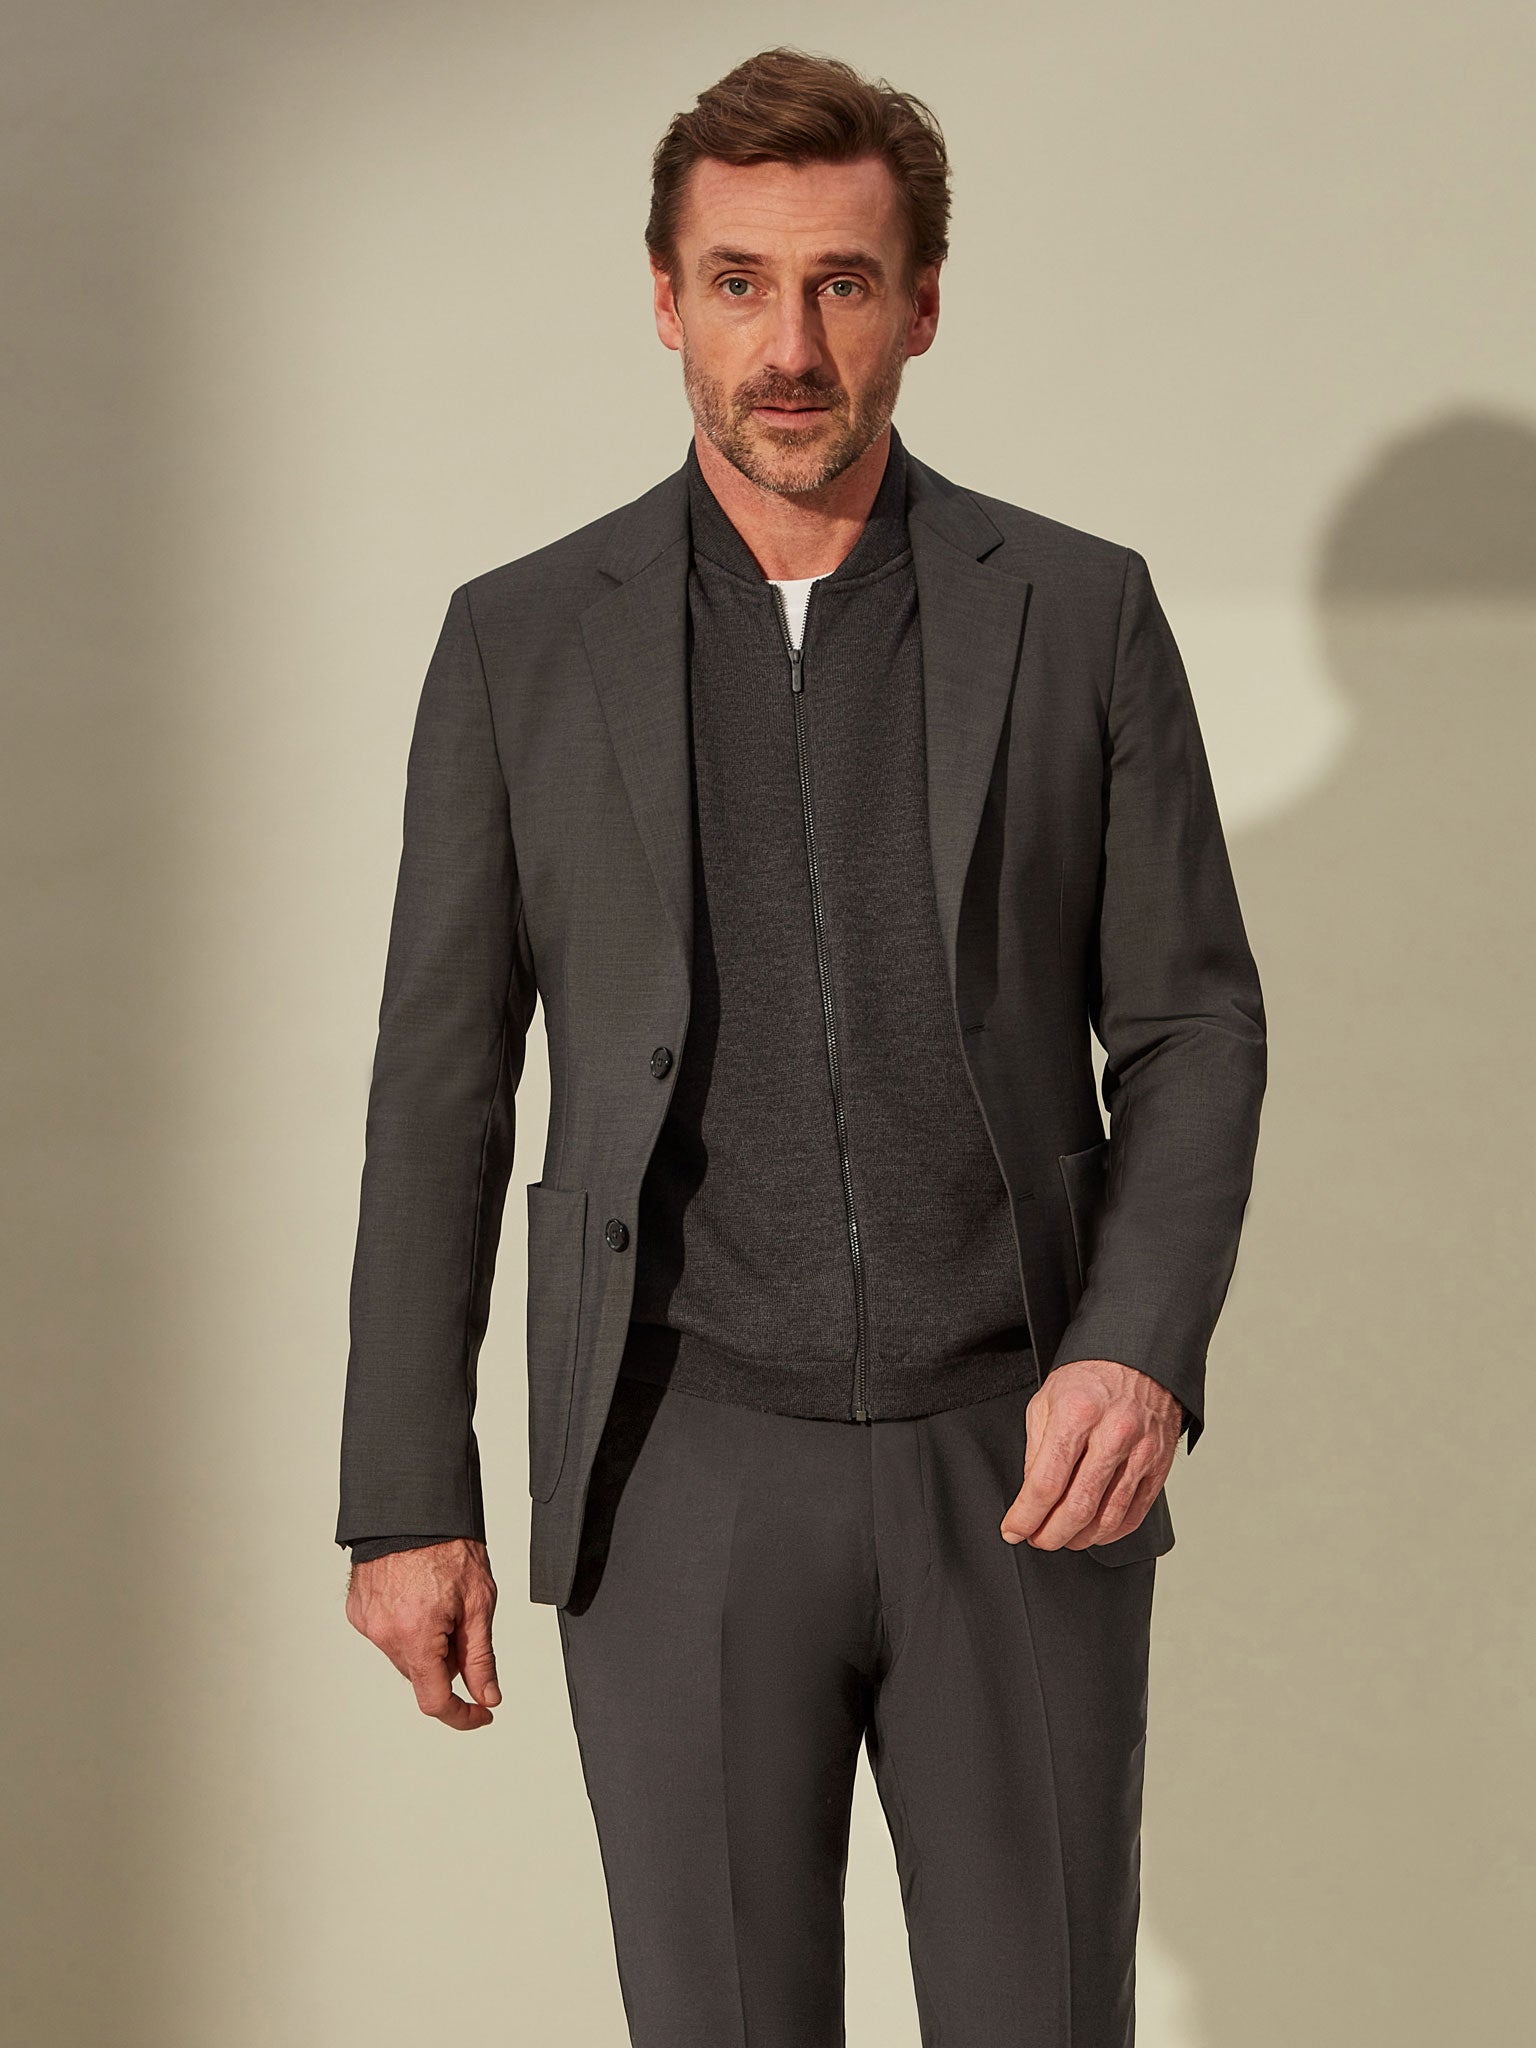 grey cardigan for men, stay warm and stylish with Emigre's latest collection